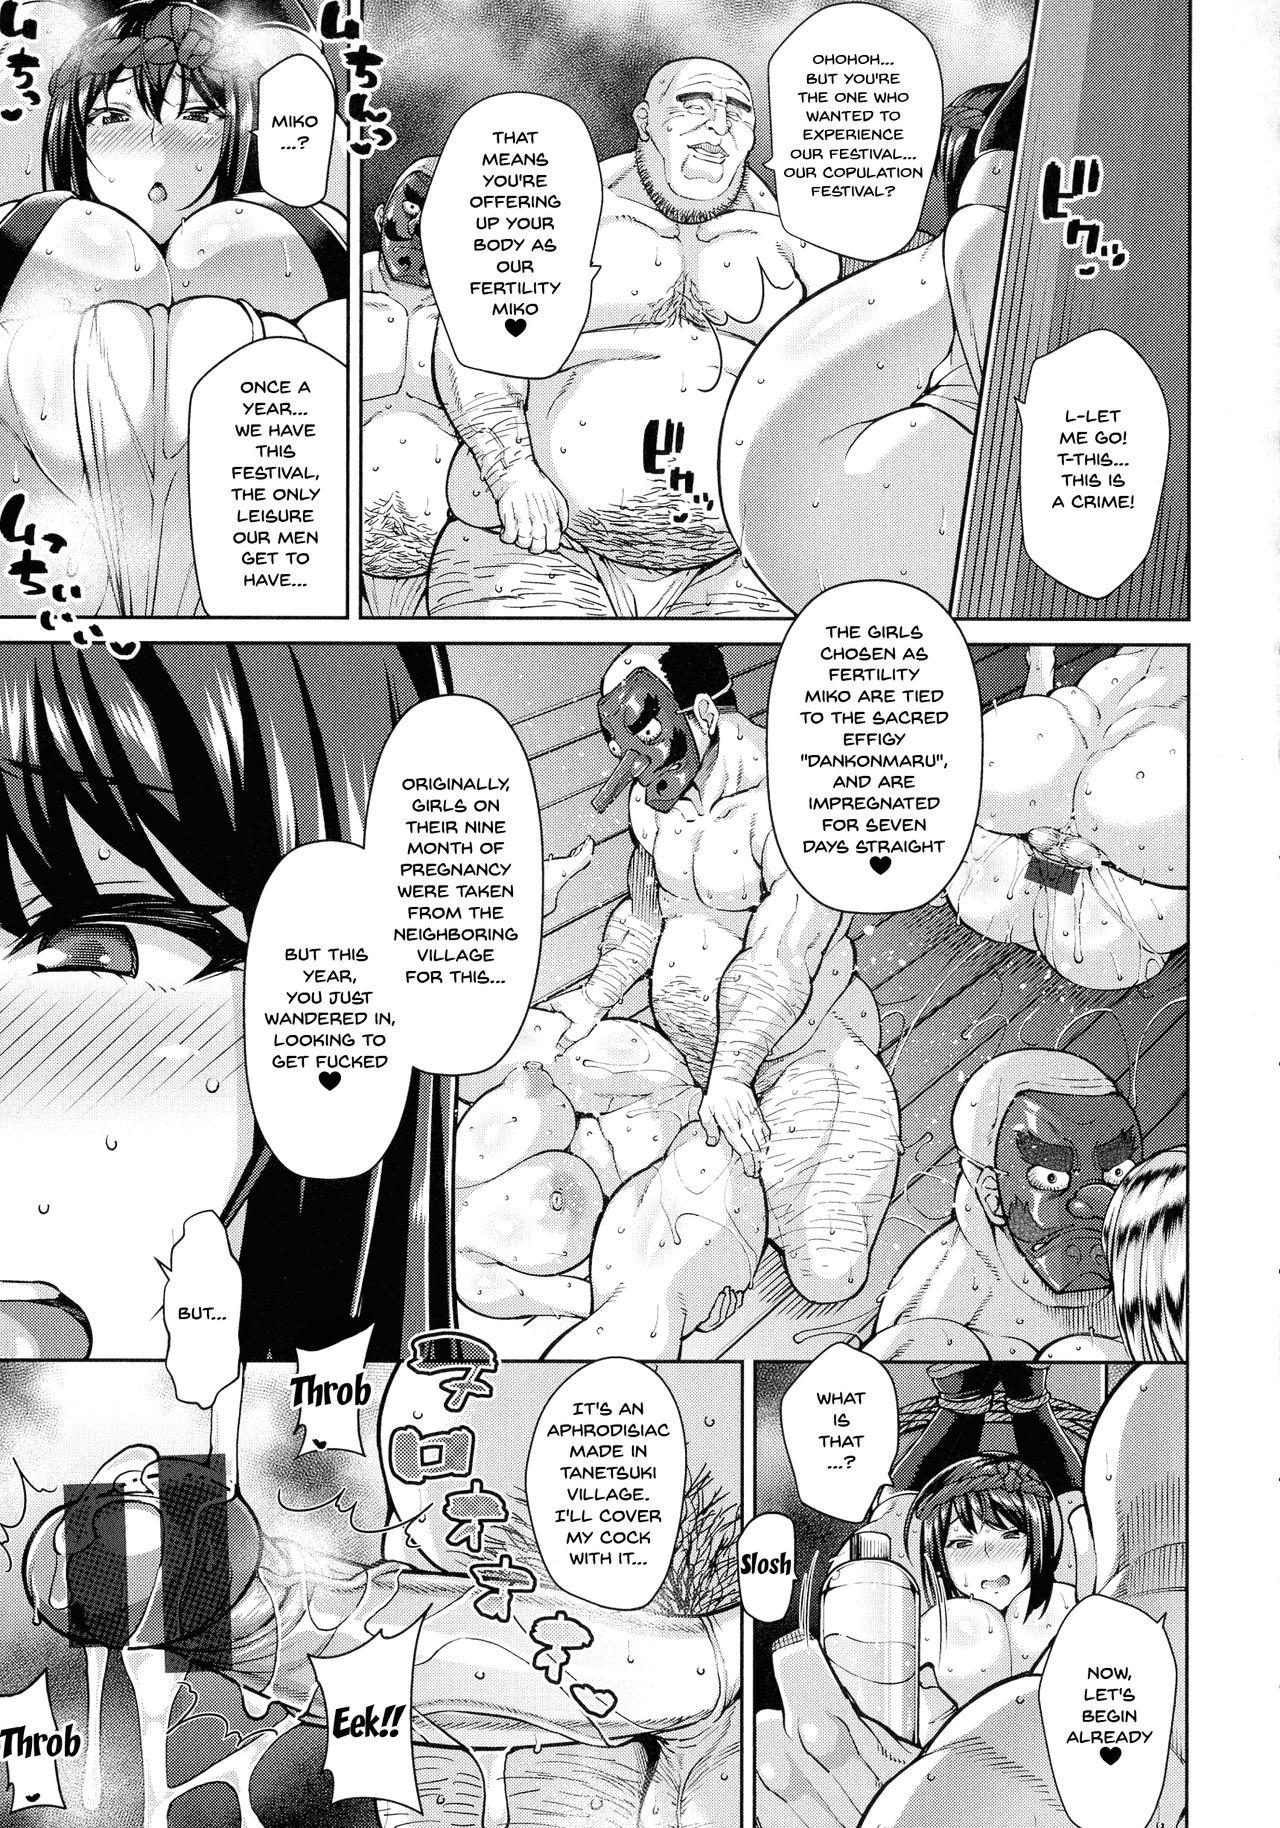 Small Boobs Tanetsukimura's Perverted Mating Festival Lesbiansex - Page 9